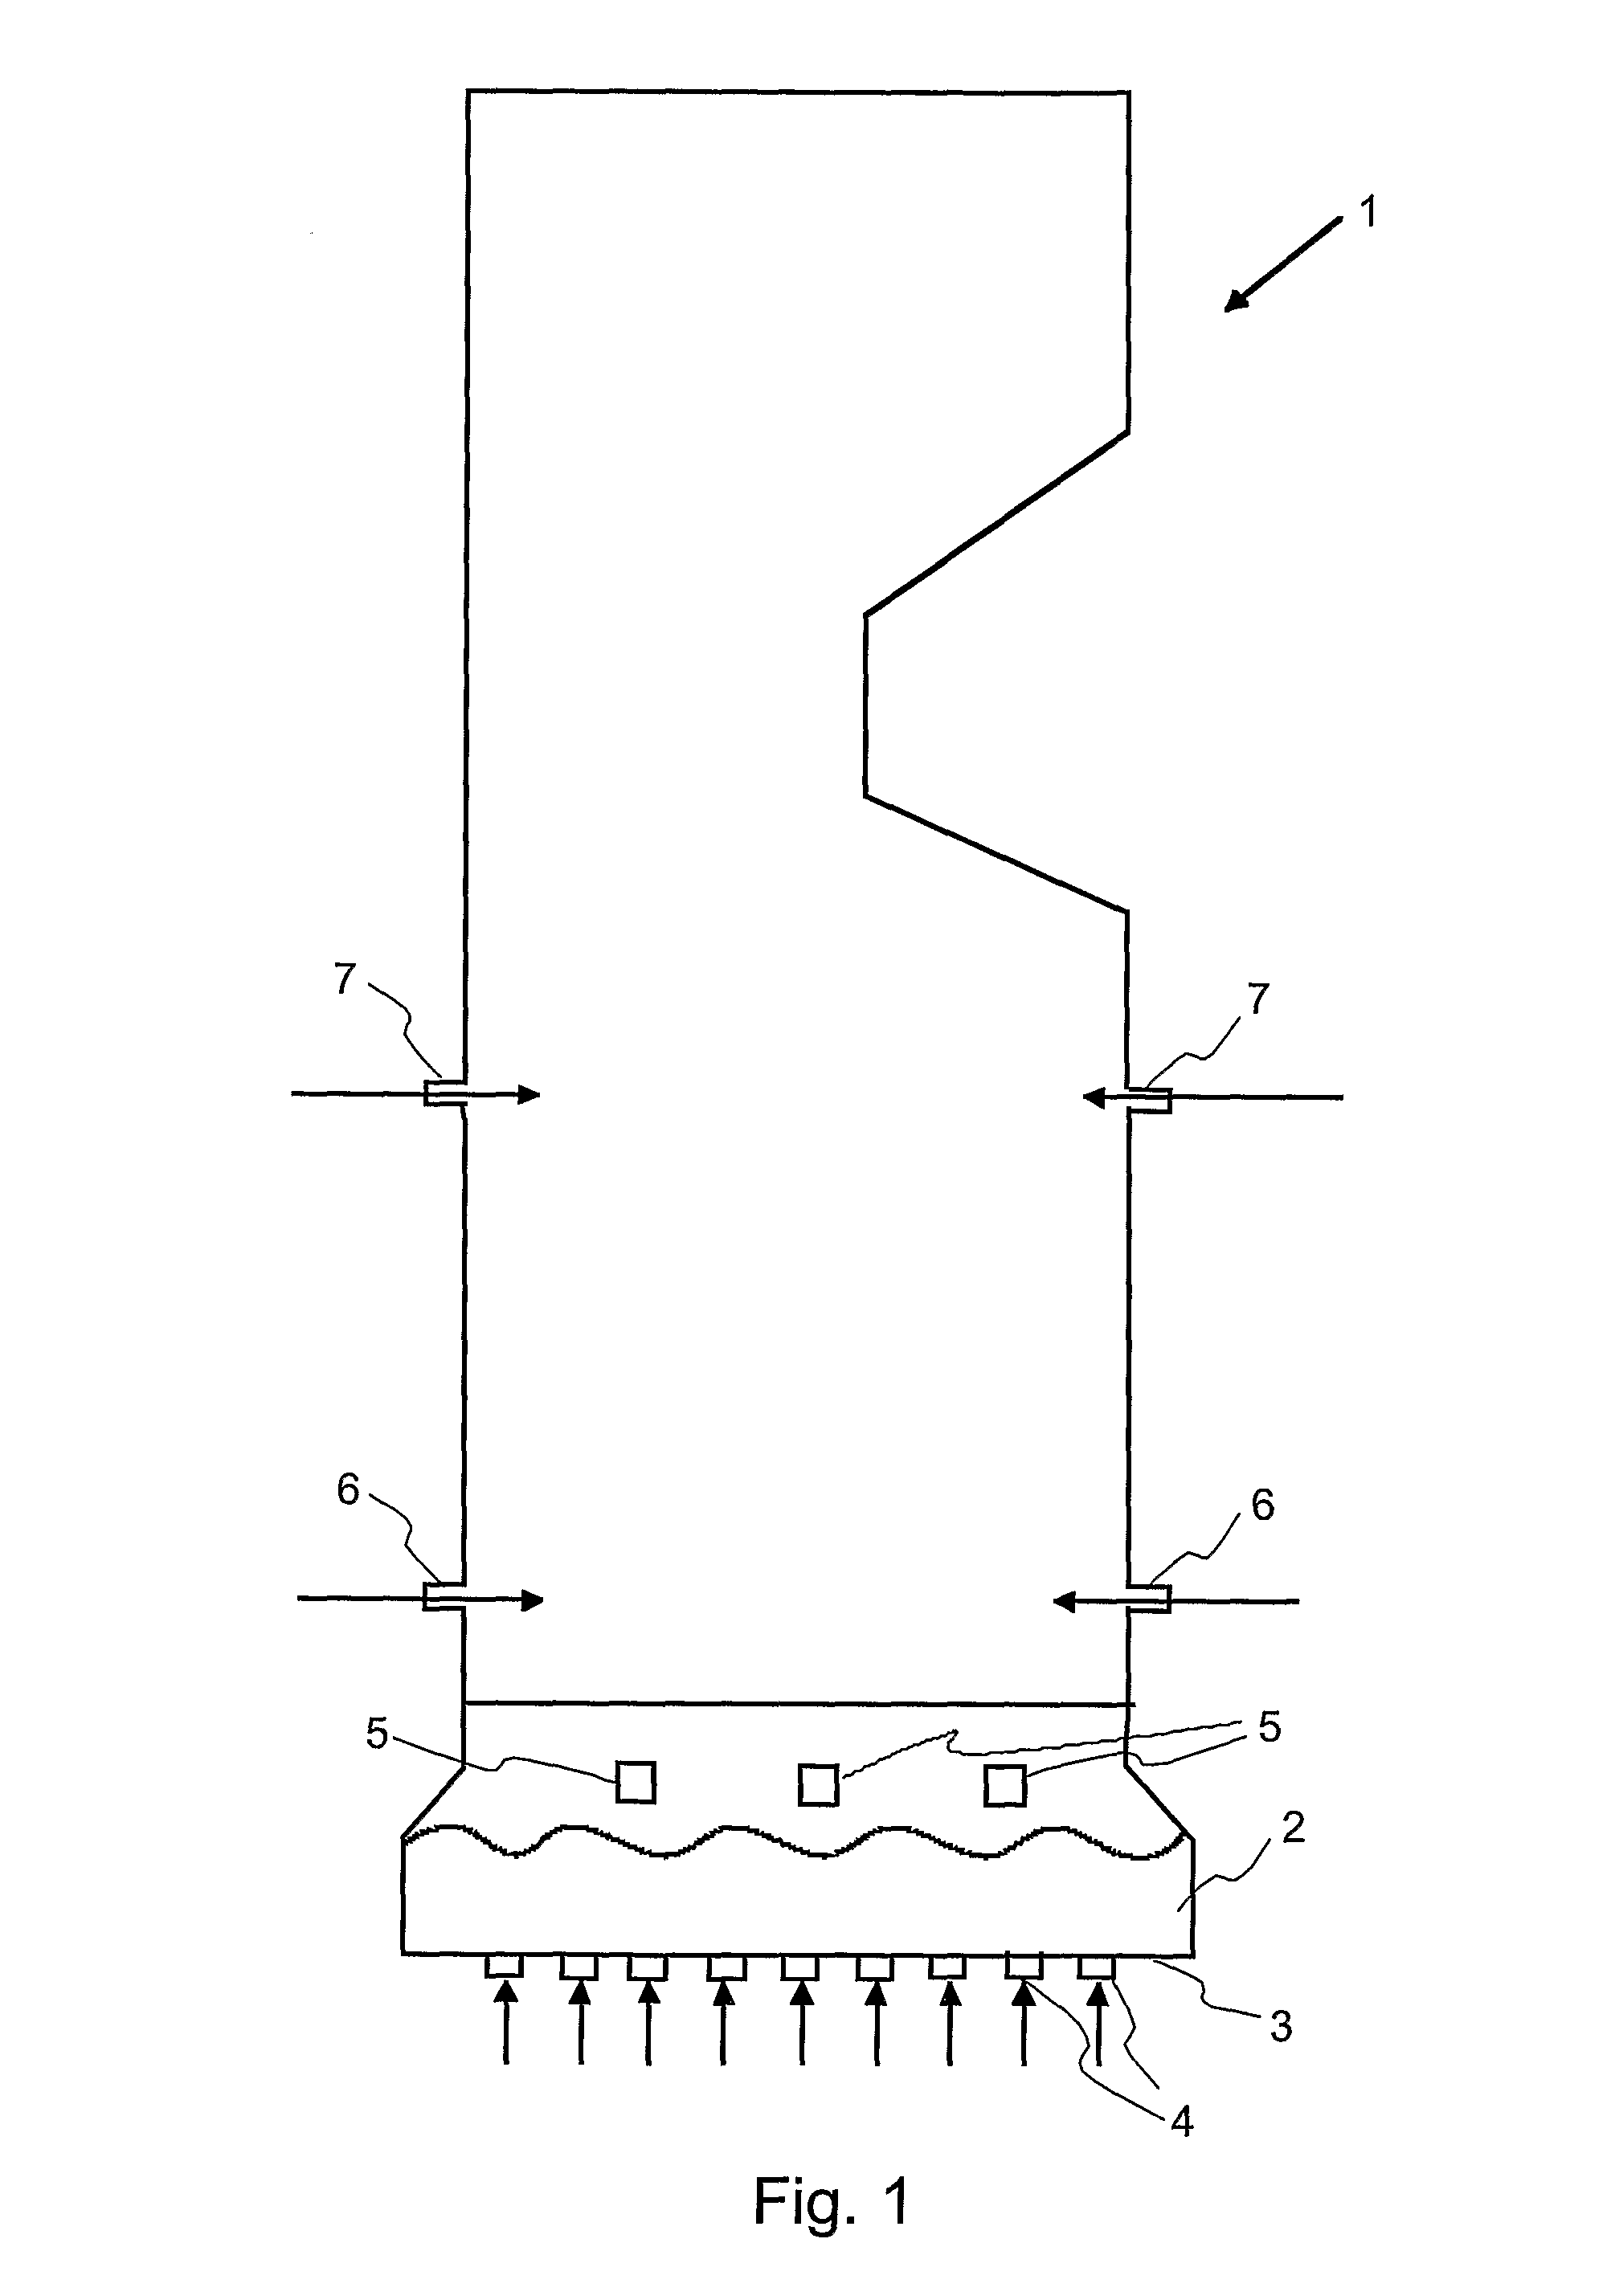 Method For Reducing Nitrogen Oxide Emissions of a Bubbling Fluidized Bed Boiler and an Air Distribution System of a Bubbling Fluidized Bed Boiler